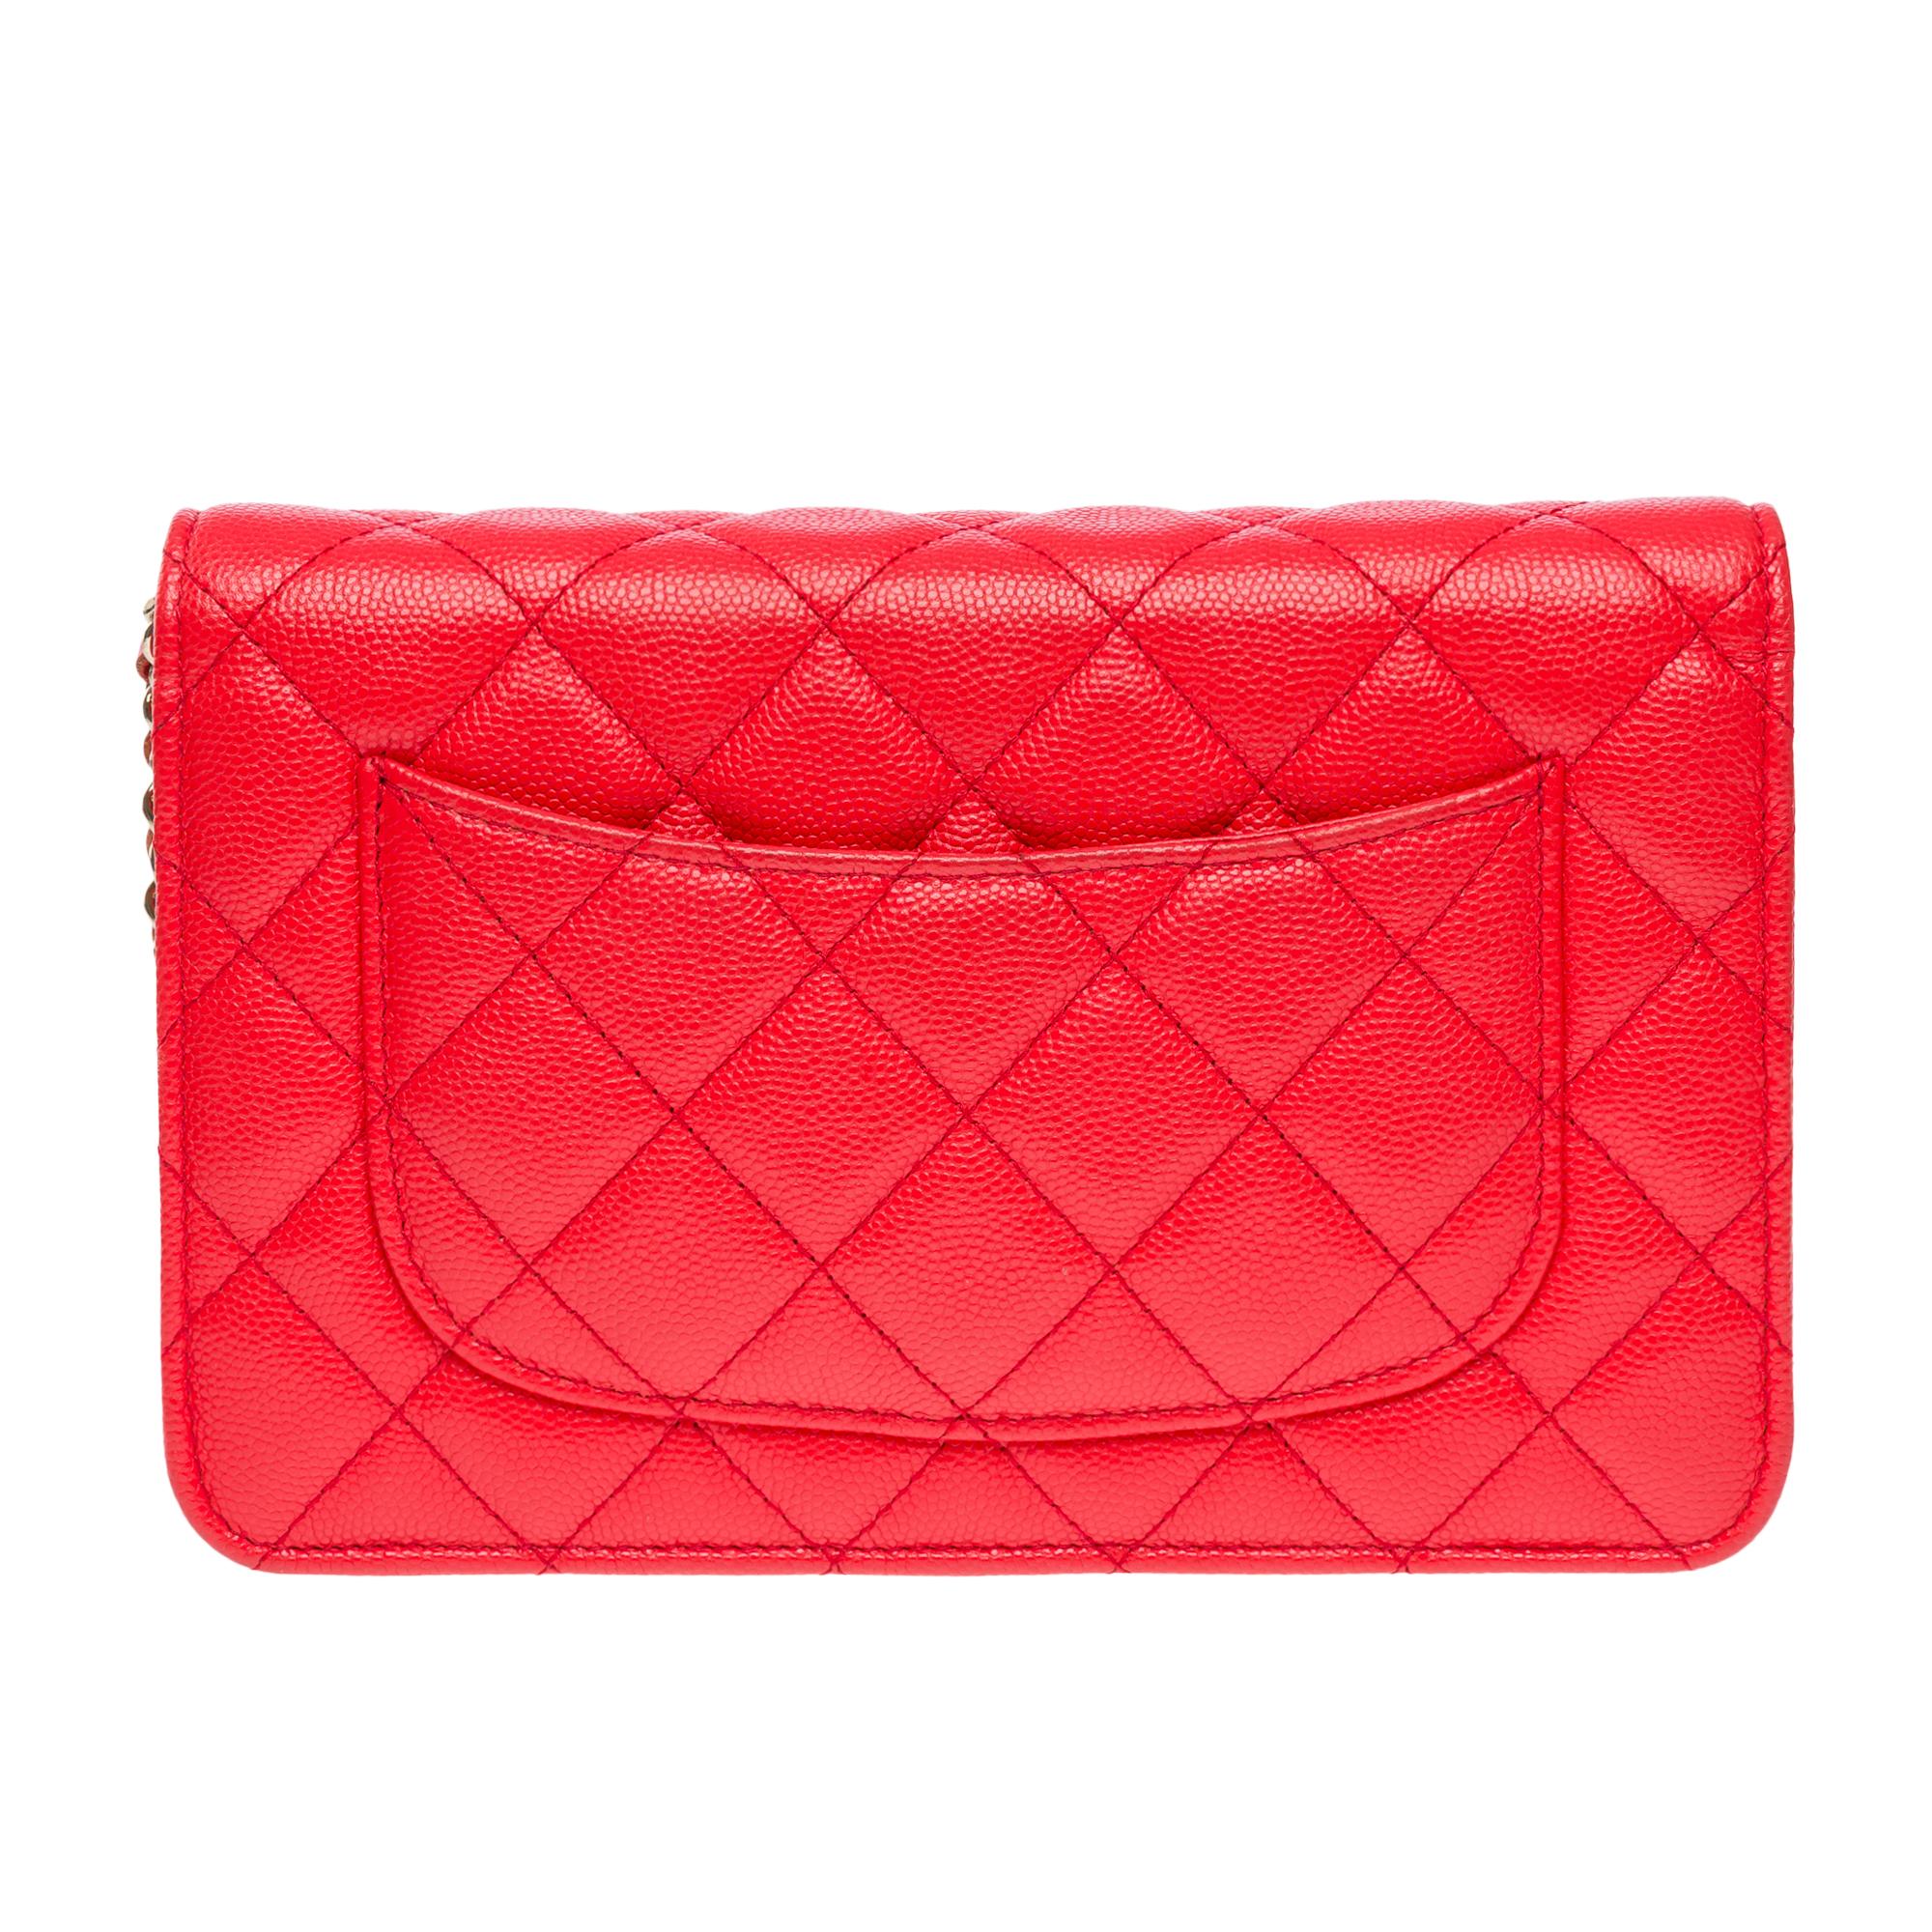 Women's Chanel Wallet on Chain (WOC)  shoulder bag in Red quilted Caviar leather, GHW For Sale